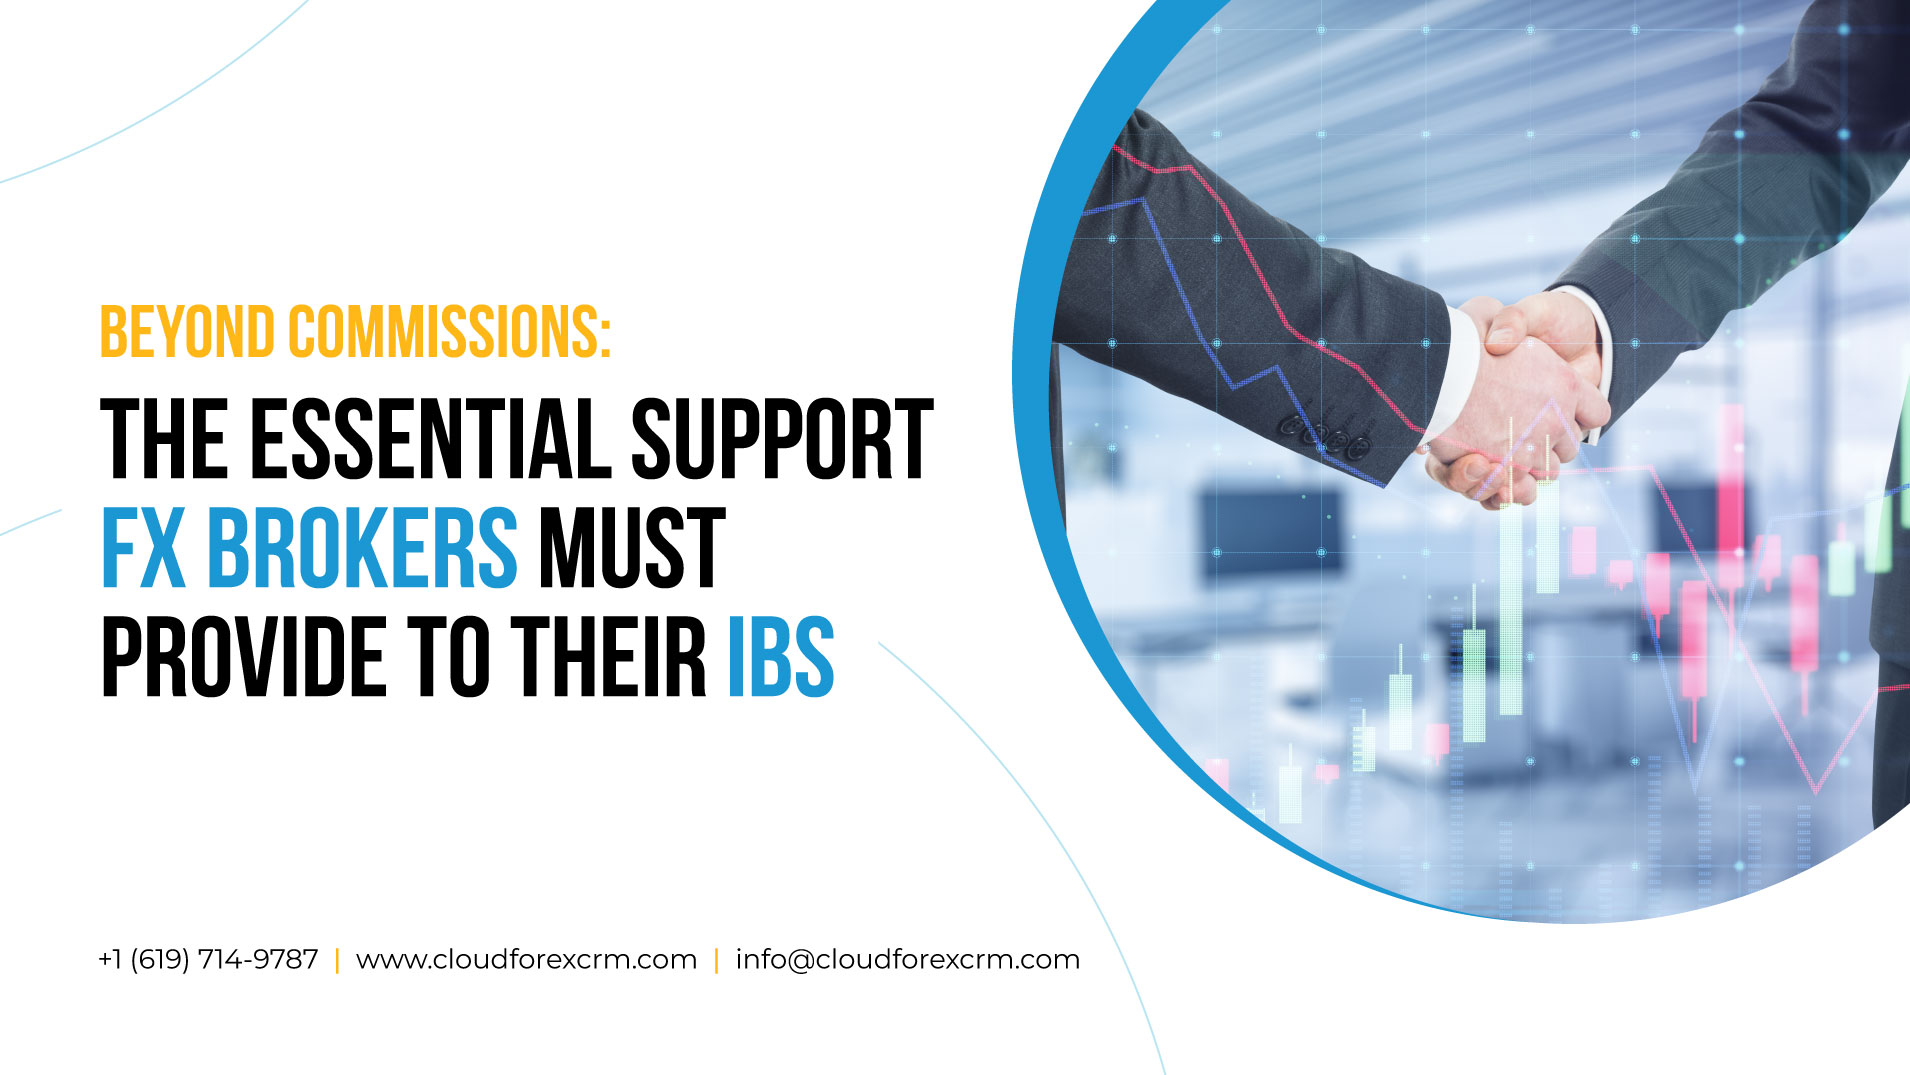 Beyond Commissions: The Essential Support FX Brokers Must Provide to Their IBs